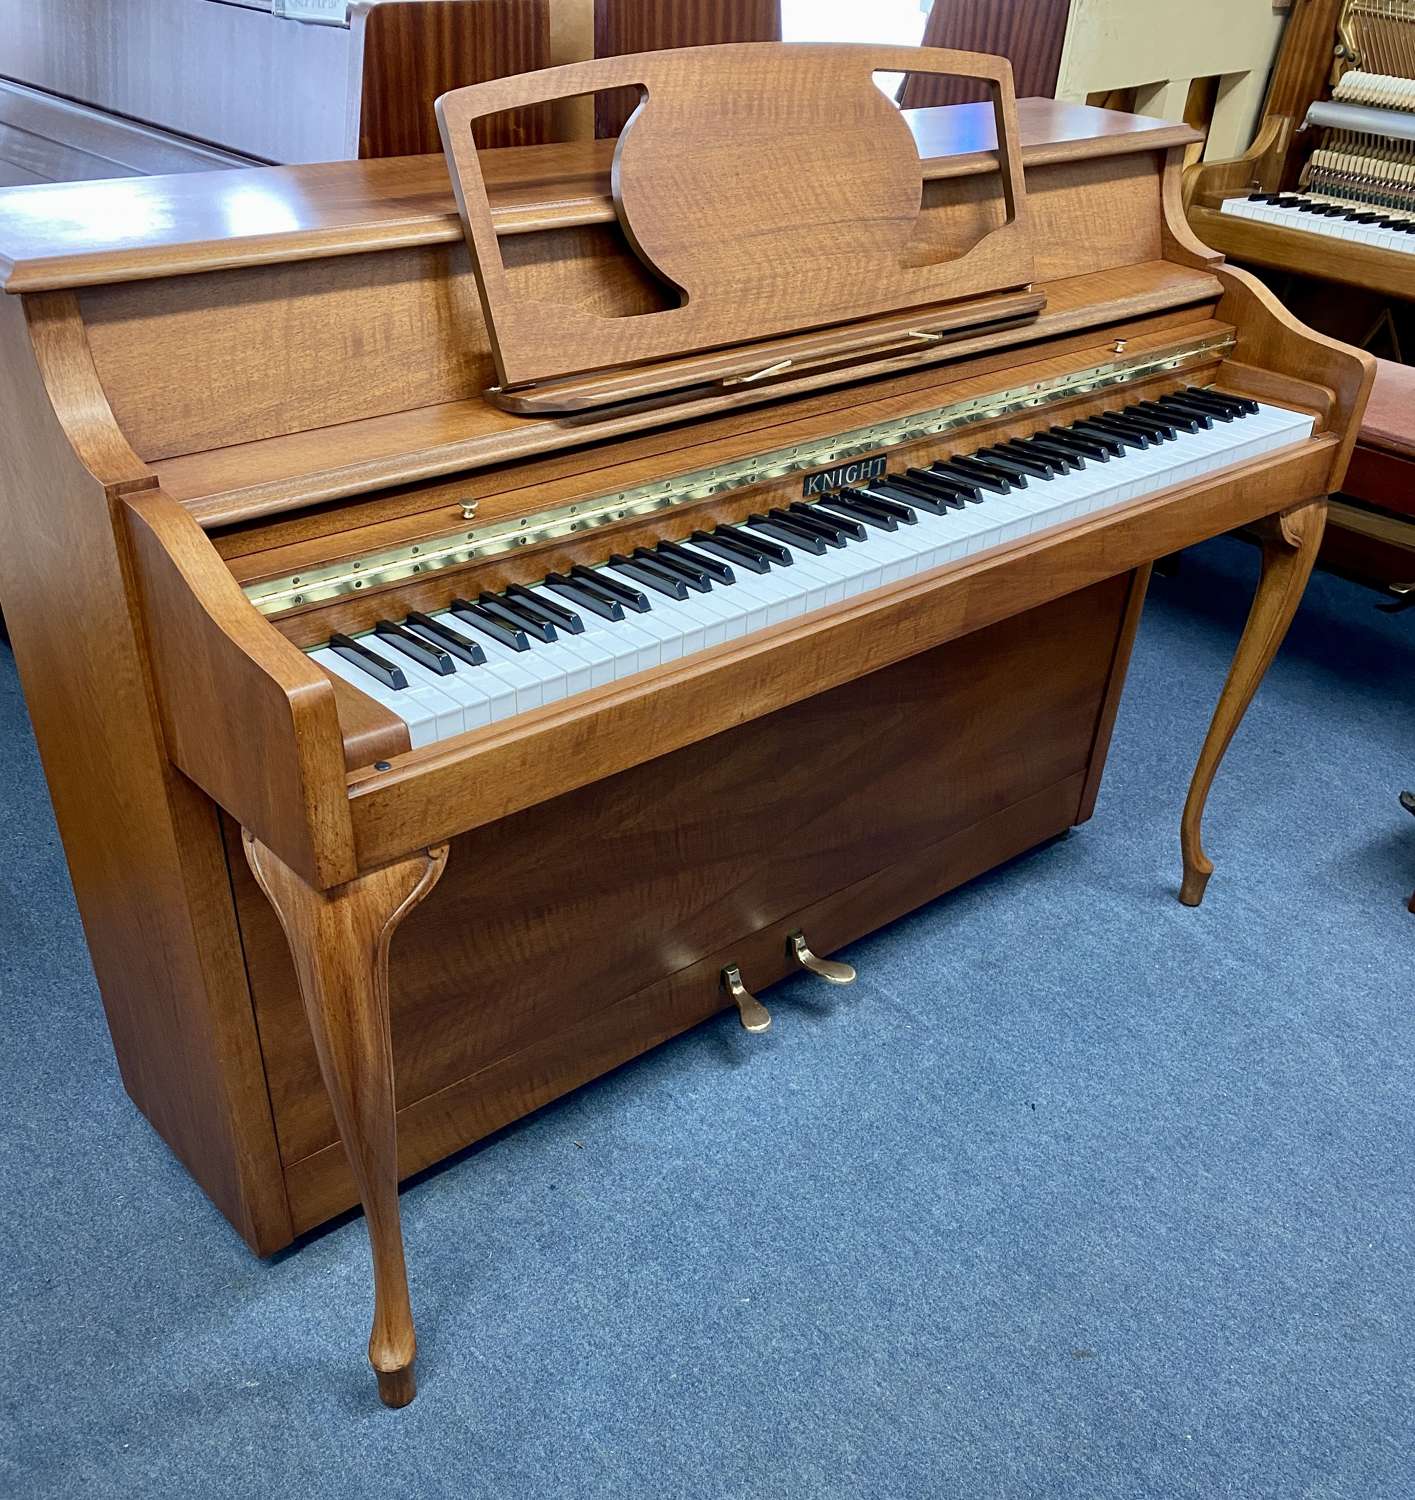 KNIGHT K15 upright piano for sale